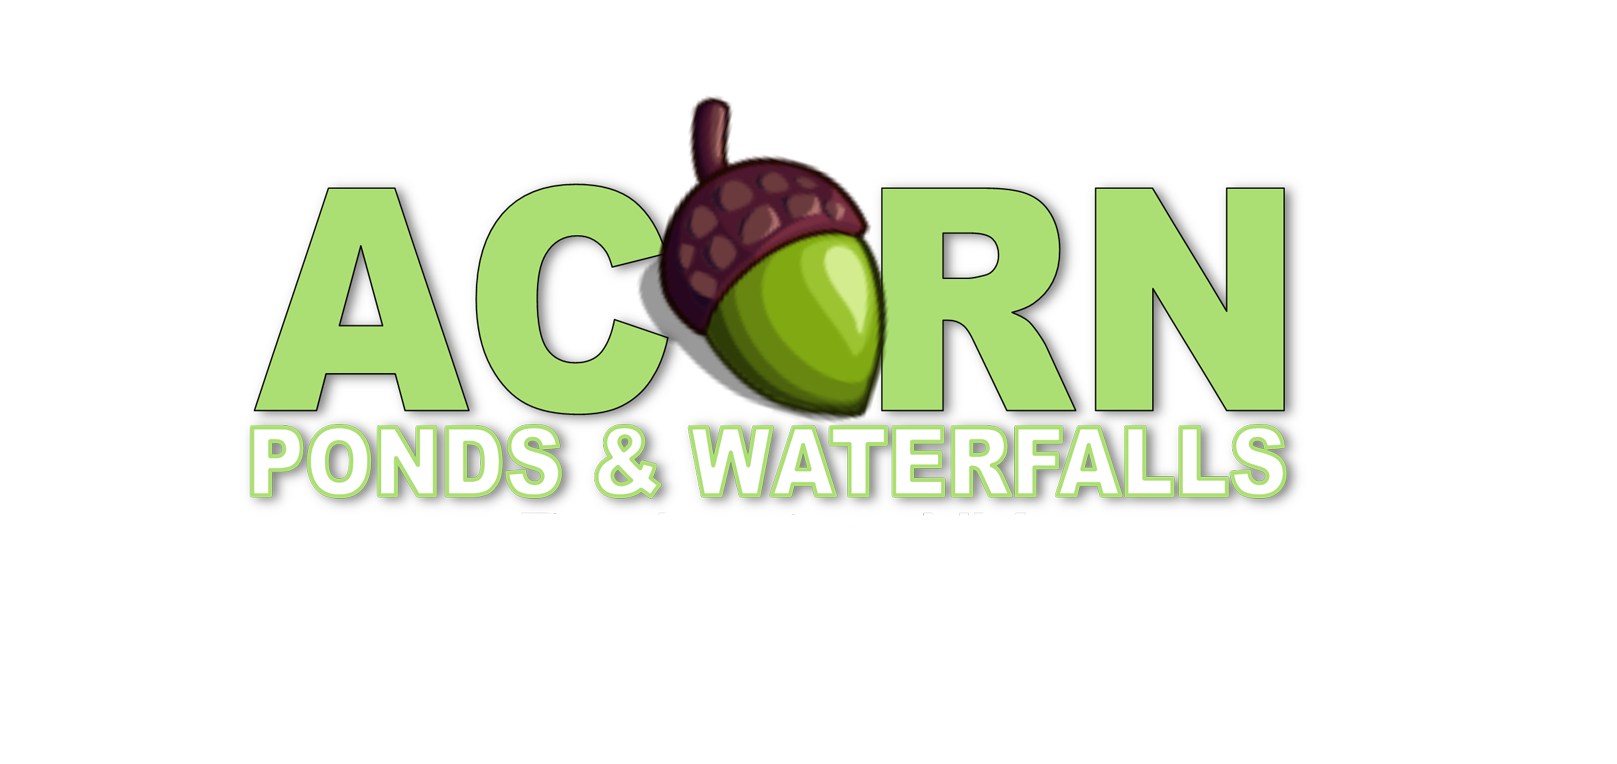 Koi Pond & Pondless Water Feature-Waterfall Service Company Rochester NY - Acorn Ponds & Waterfalls